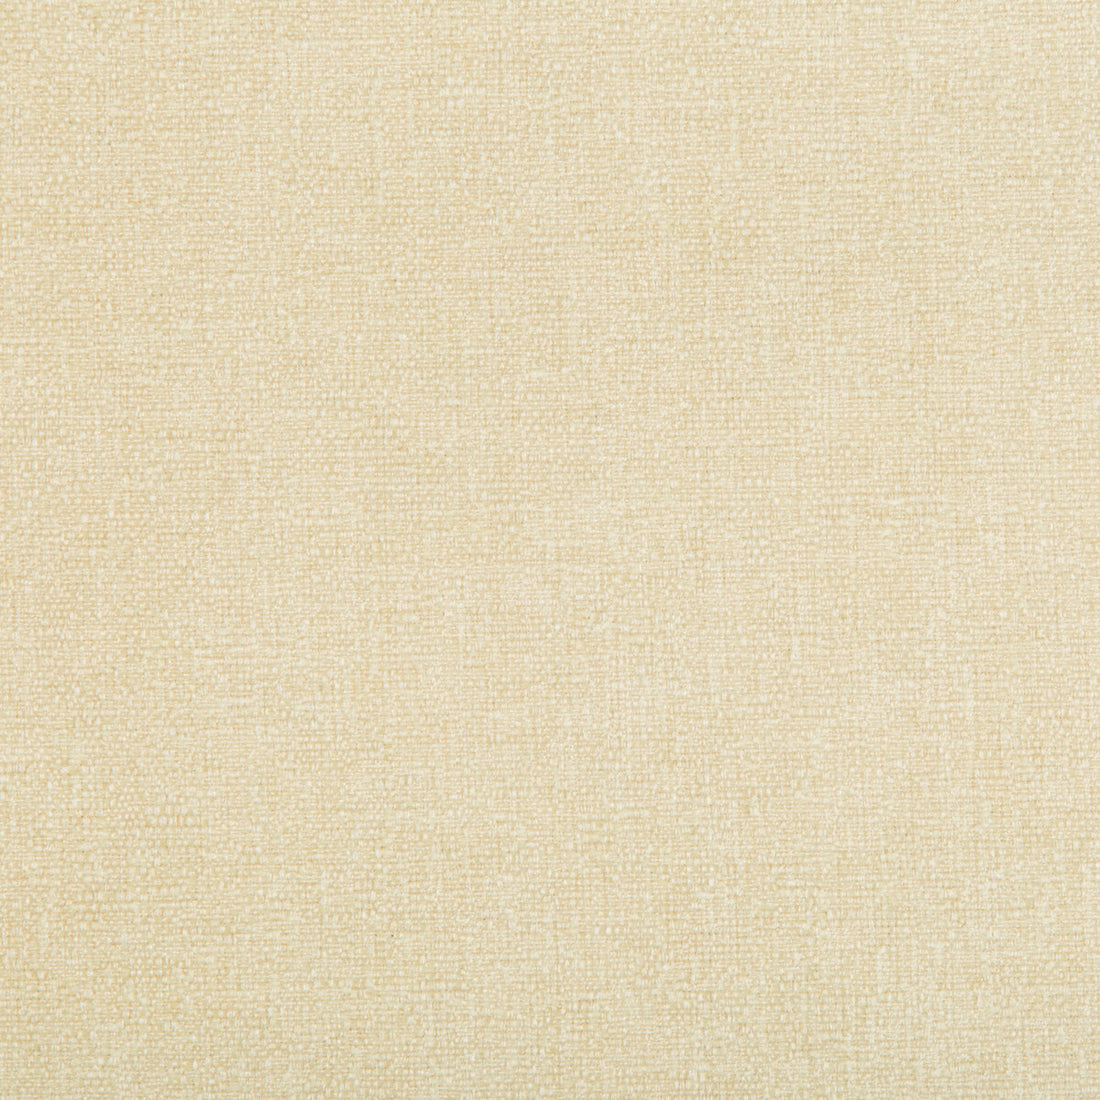 Kravet Contract fabric in 35405-116 color - pattern 35405.116.0 - by Kravet Contract in the Crypton Incase collection